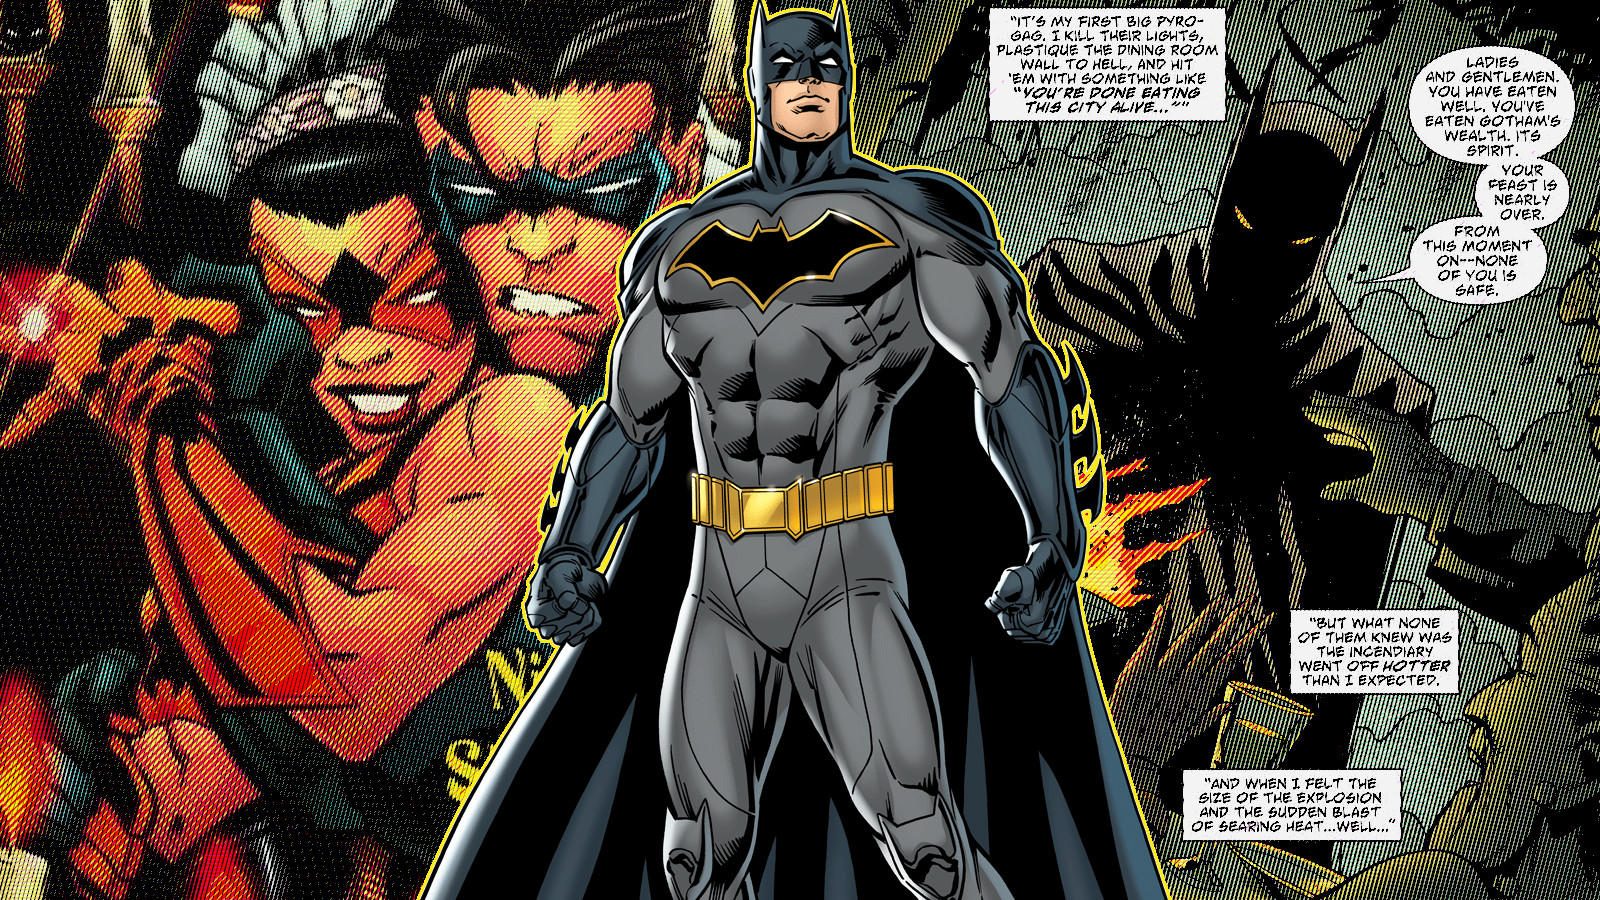 Batman, over an image of Nightwing & Tarantula and Widening Gyre's take on Year One